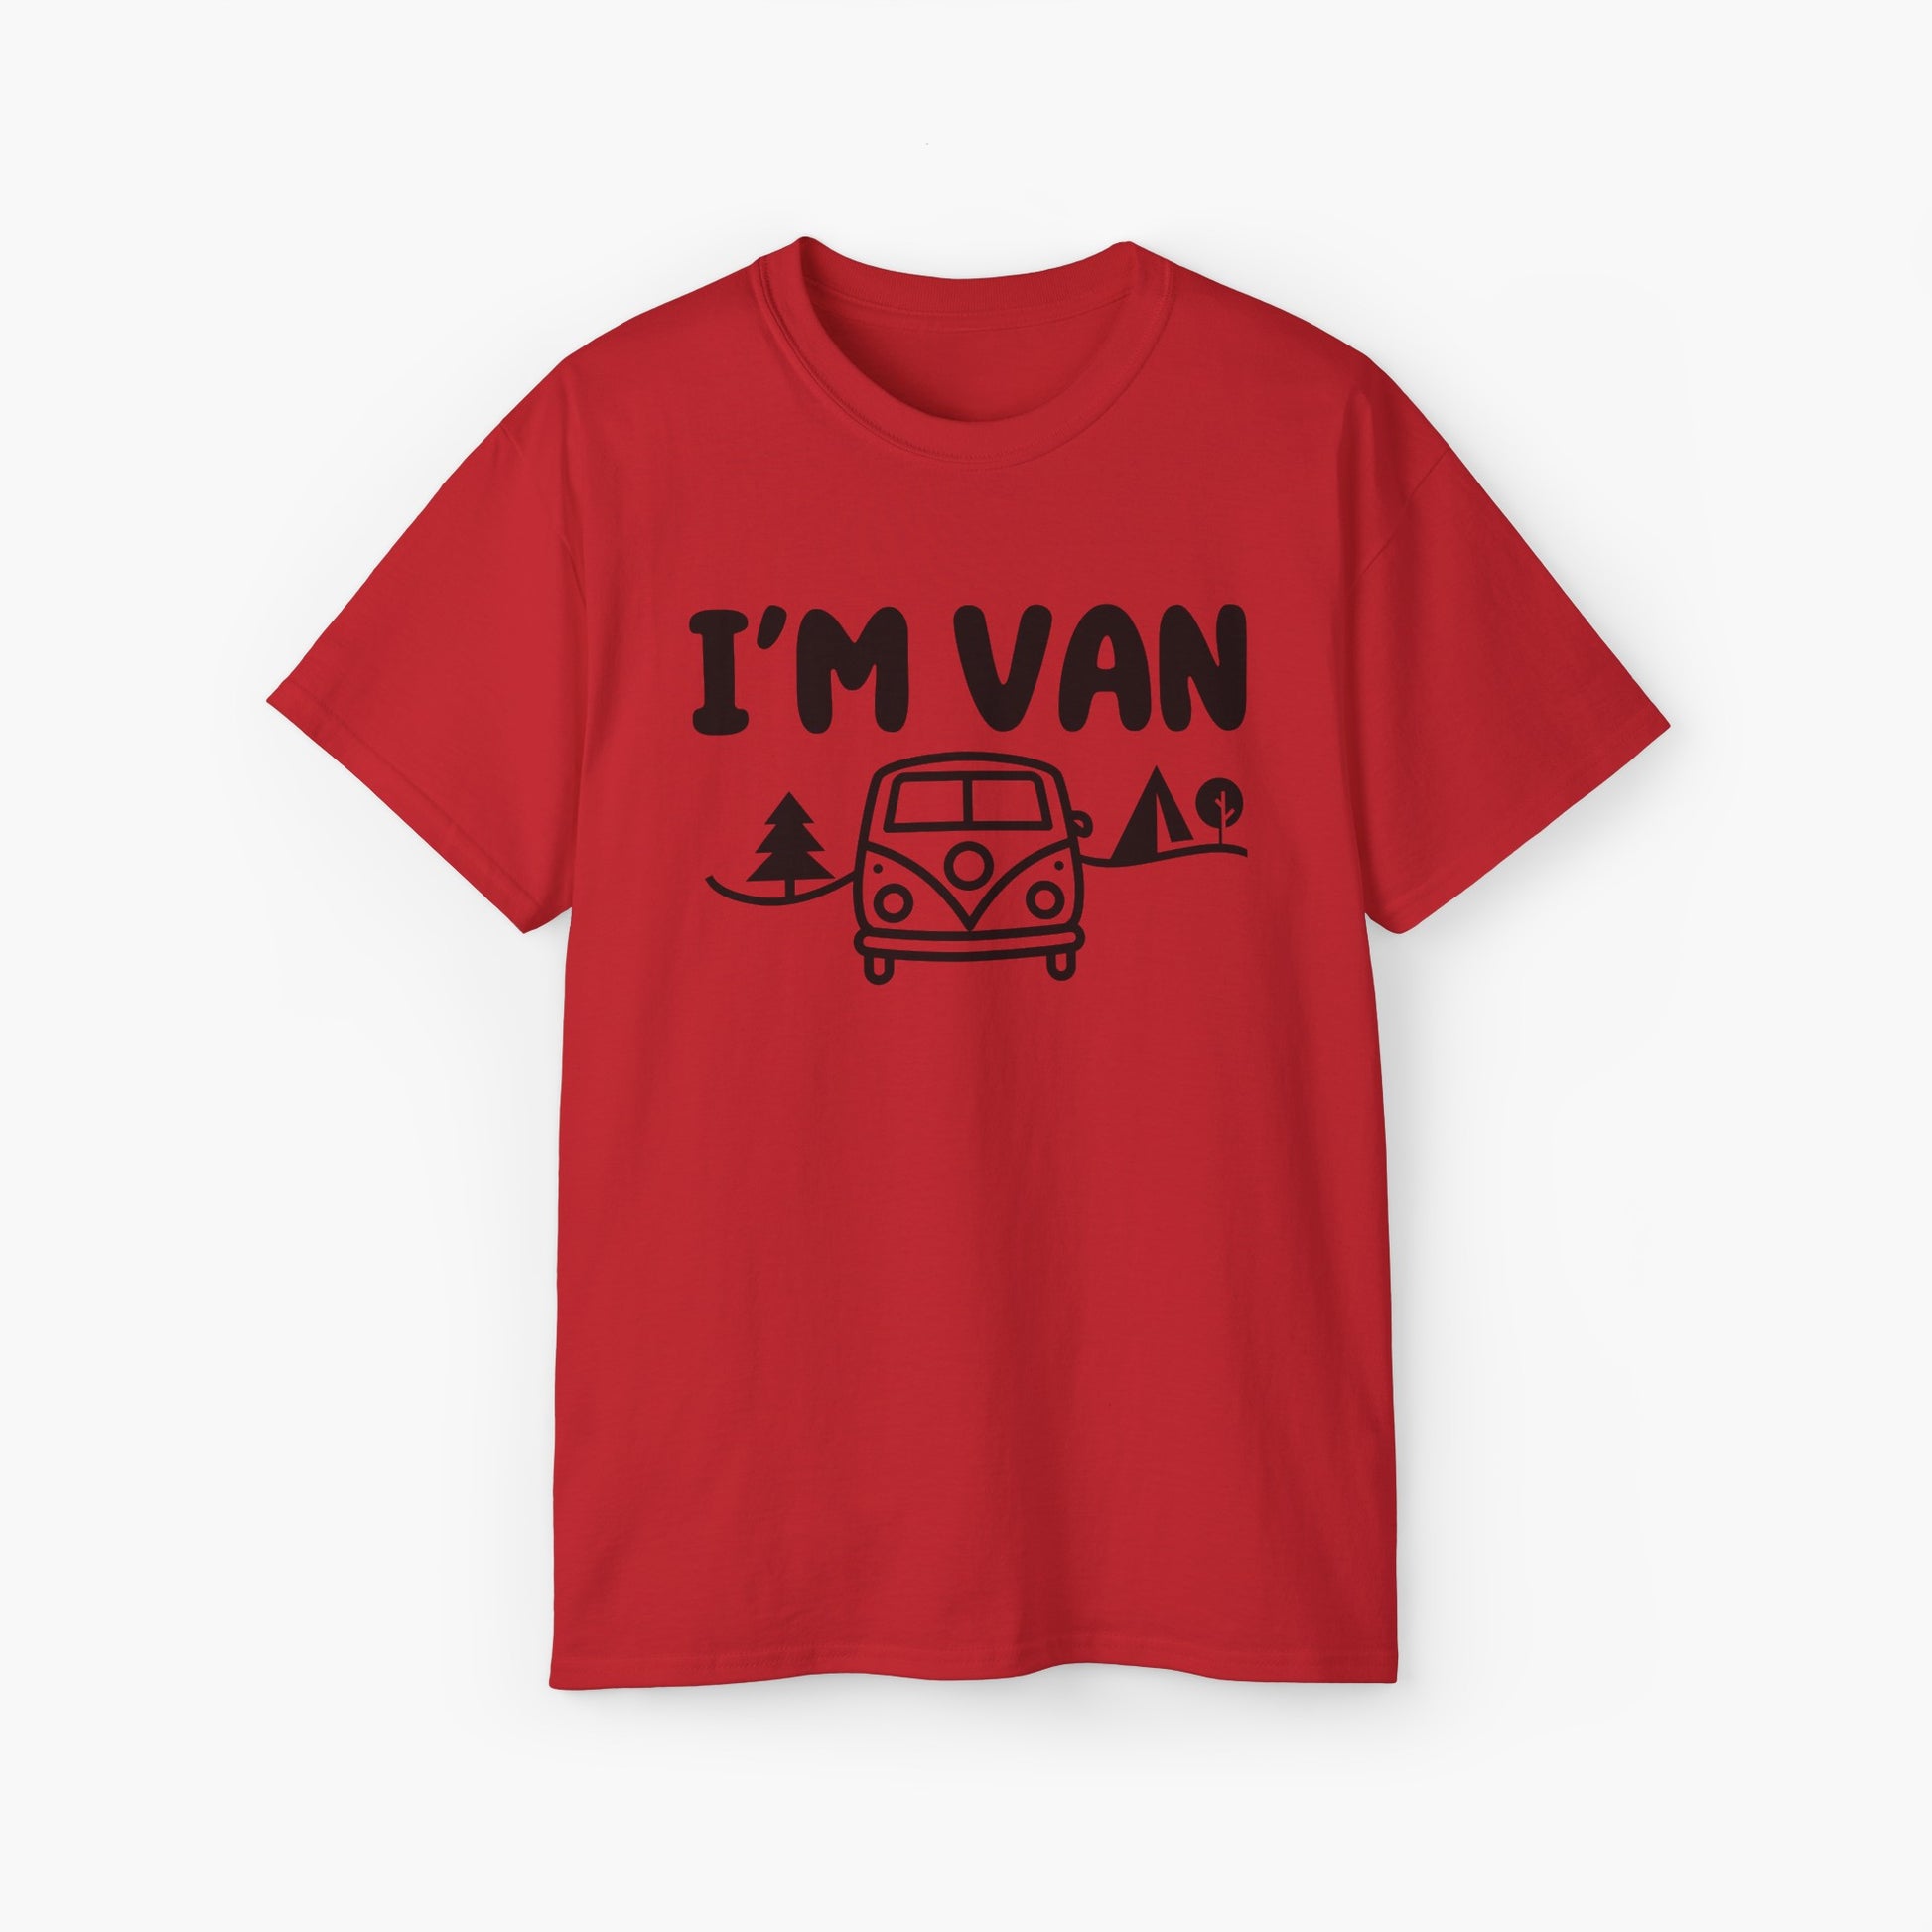 Red t-shirt with the text 'I'm Van' featuring a graphic of a van surrounded by trees on a plain background.